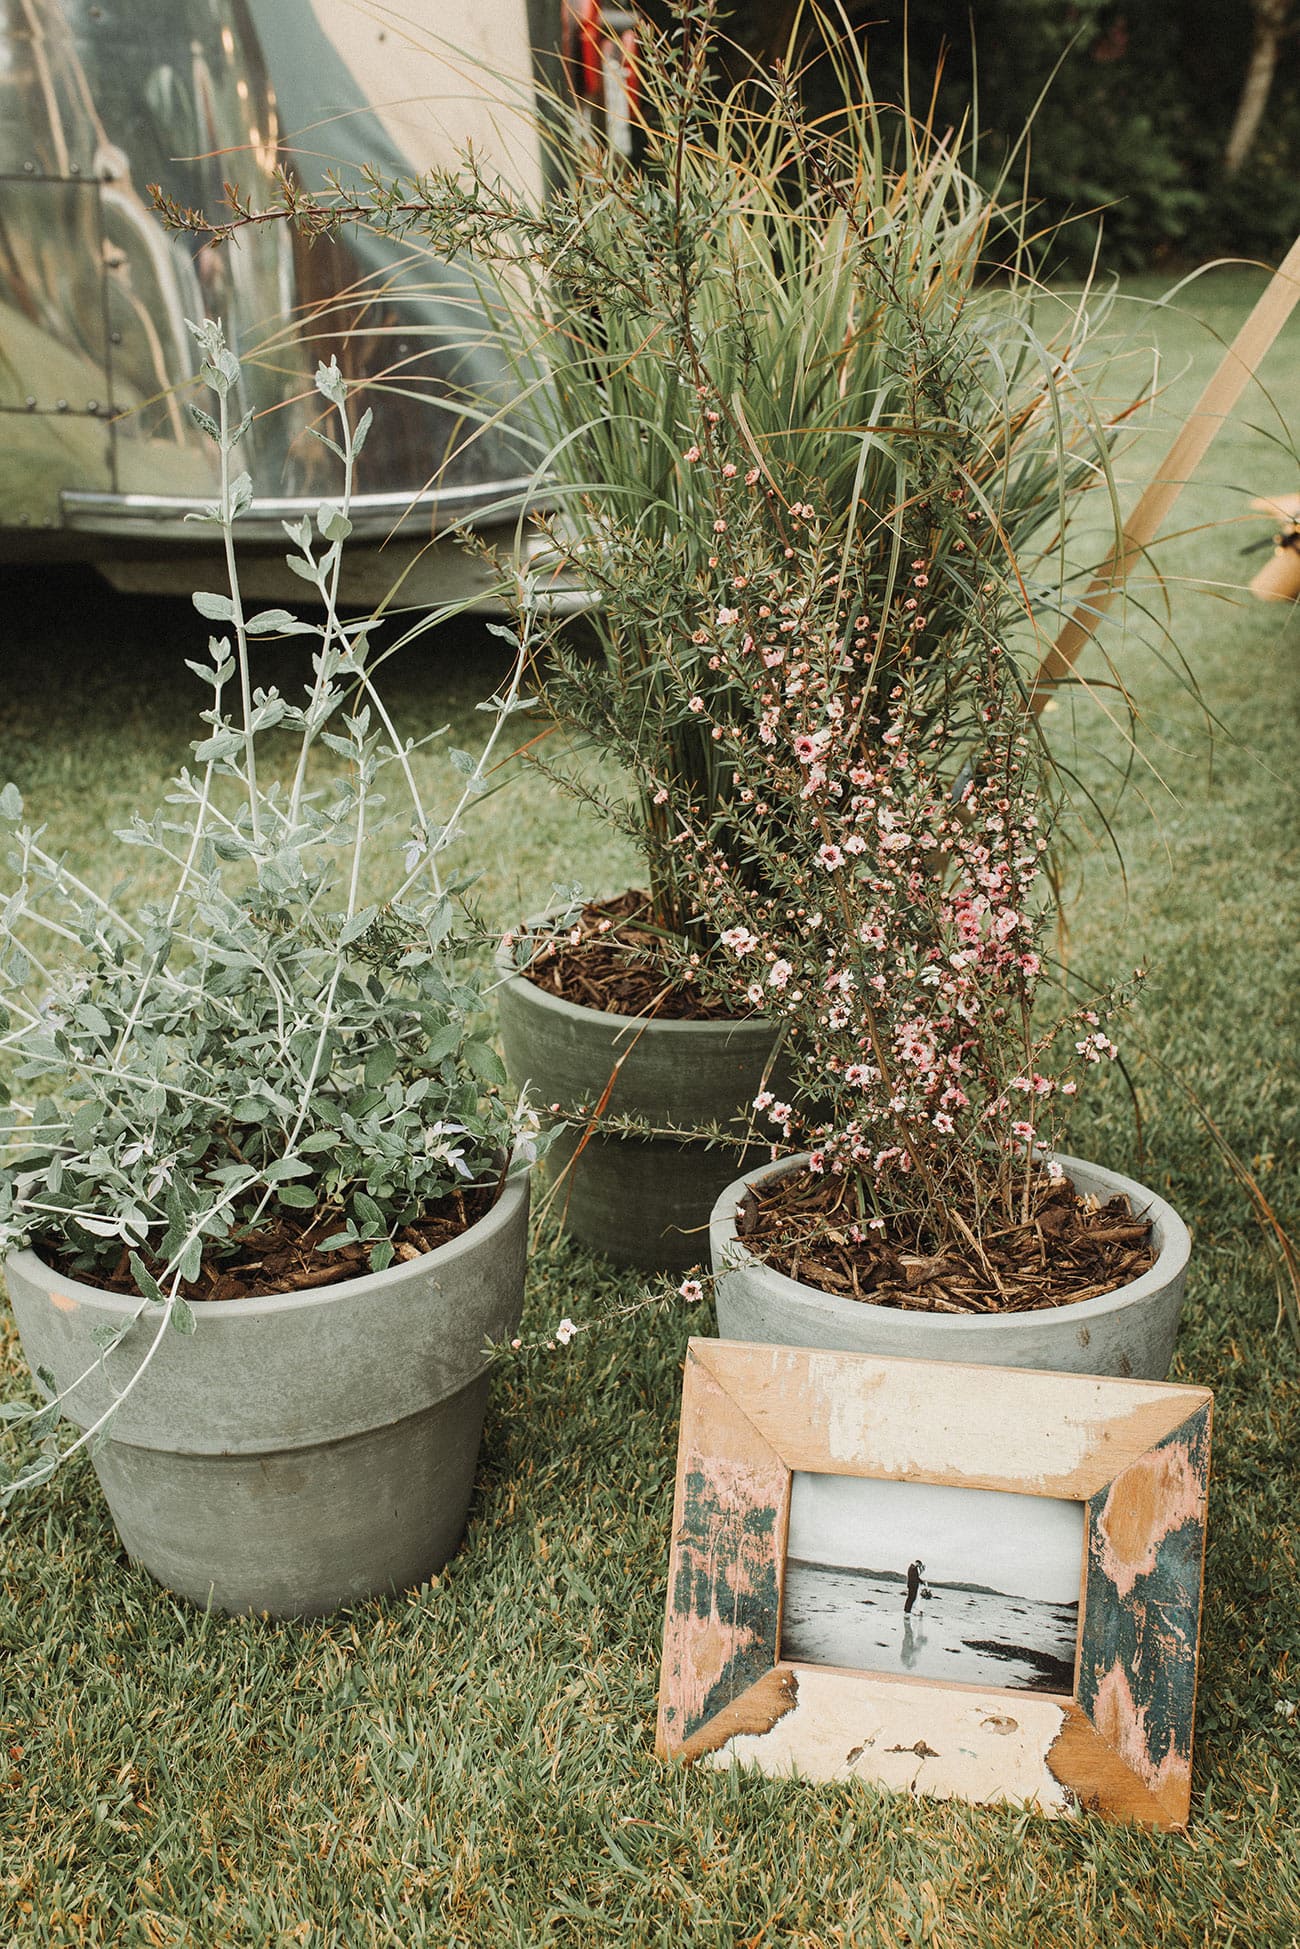 olive tress, lavender and herbs used to decorate the venue